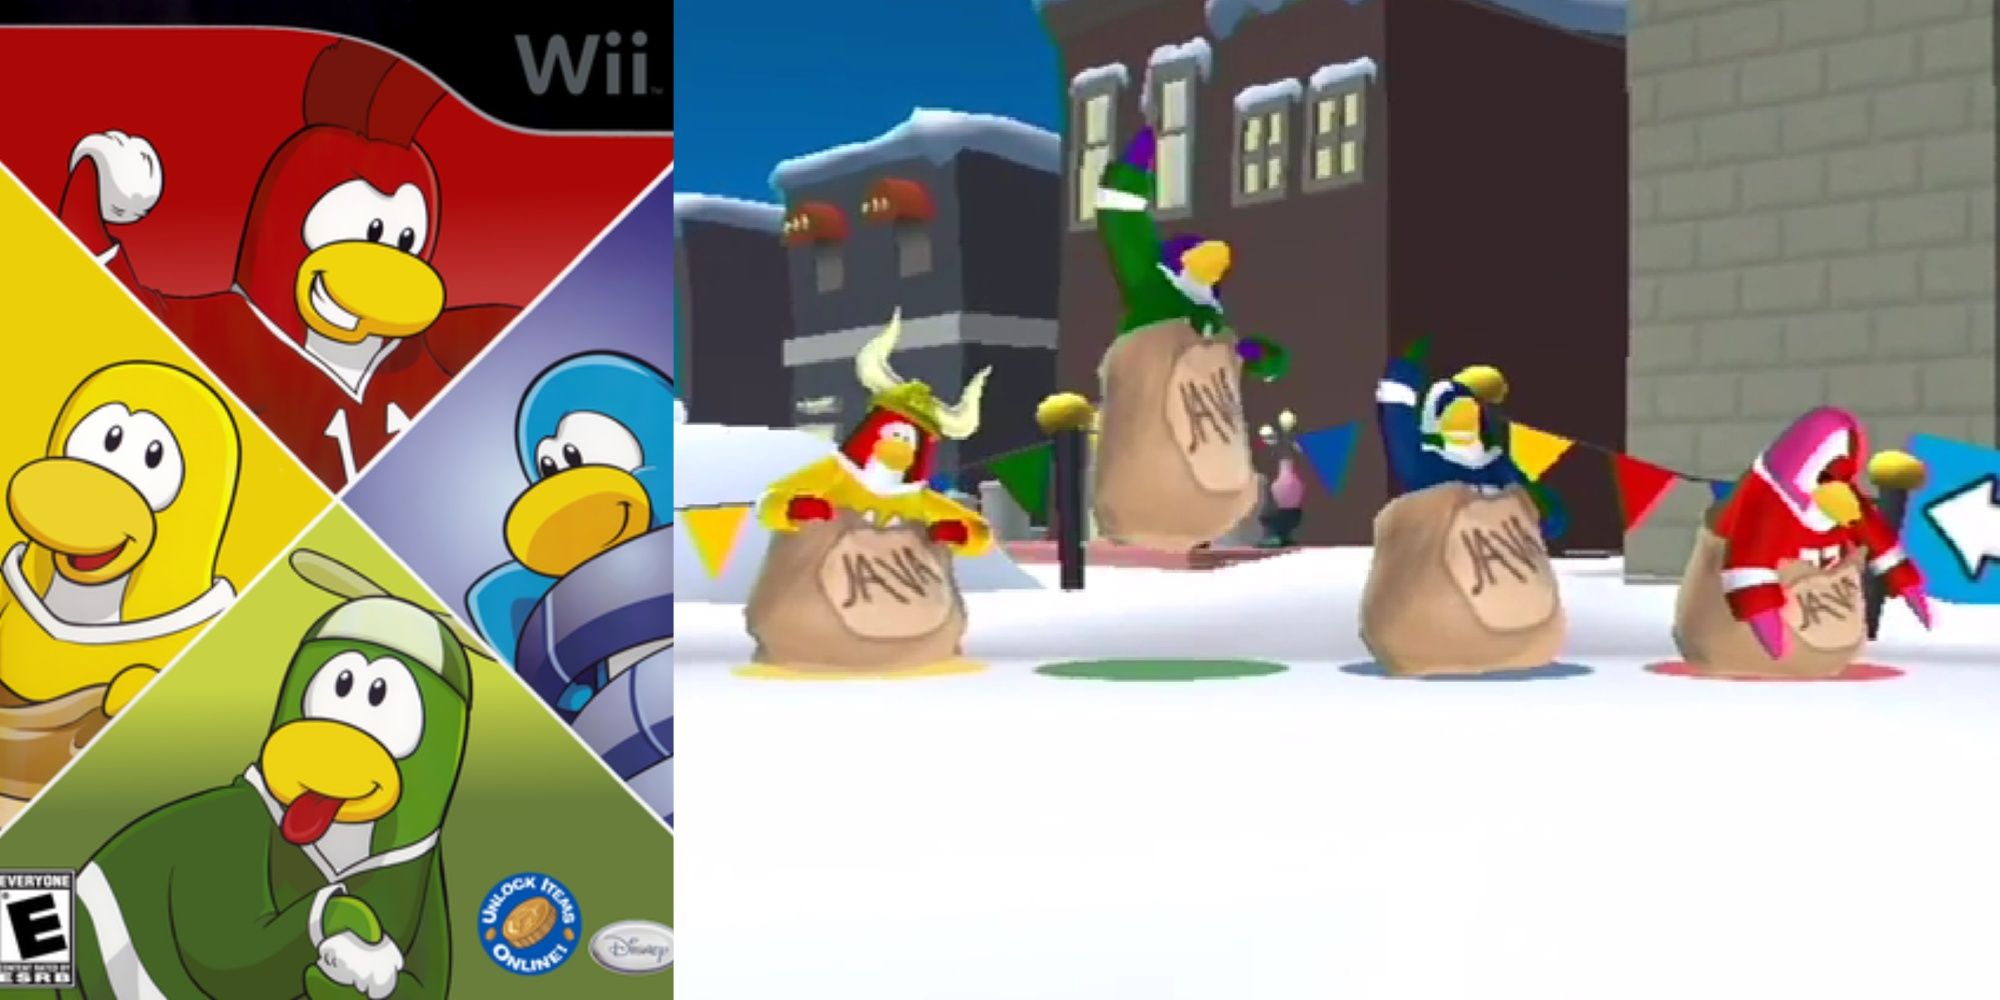 A split-image of the Wii artwork for the limited edition version of Club Penguin: Game Day and a group of Club Penguin characters after completing that Java bean bag race.